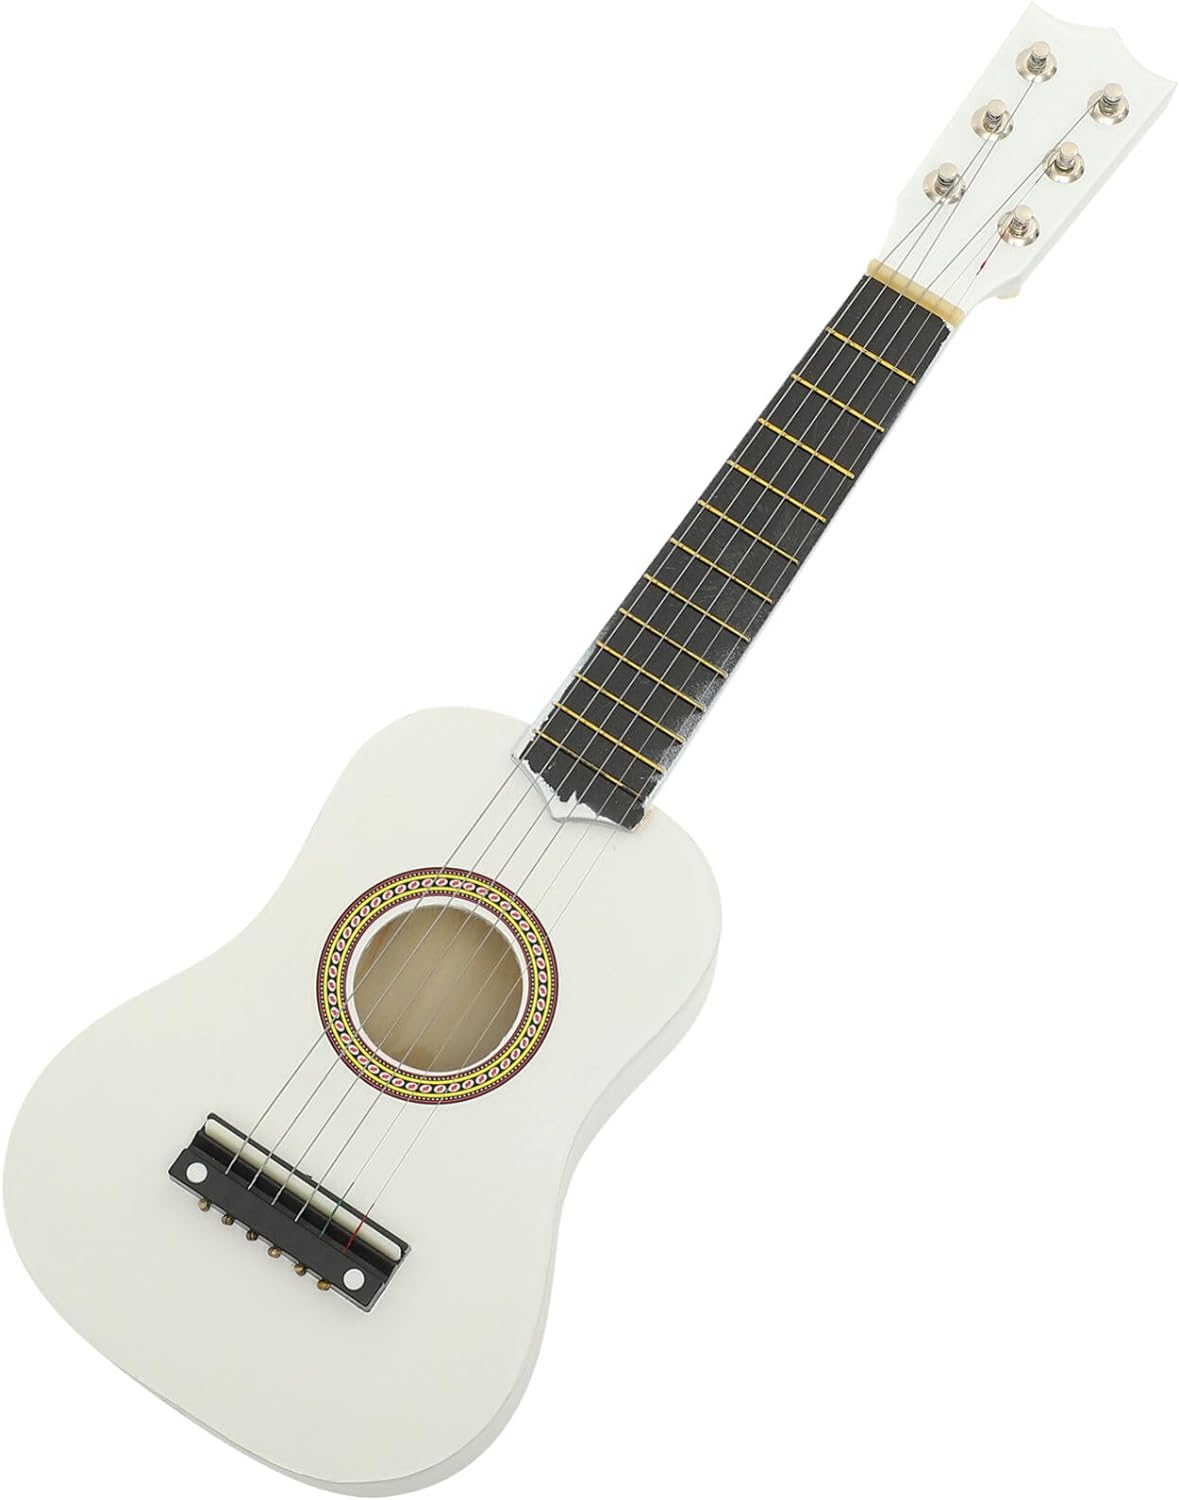 Ciieeo Ukulele Guitar 21Inch Mini Guitar Wood Musical Instruments Educational Musical Instrument Guitar for Children Students